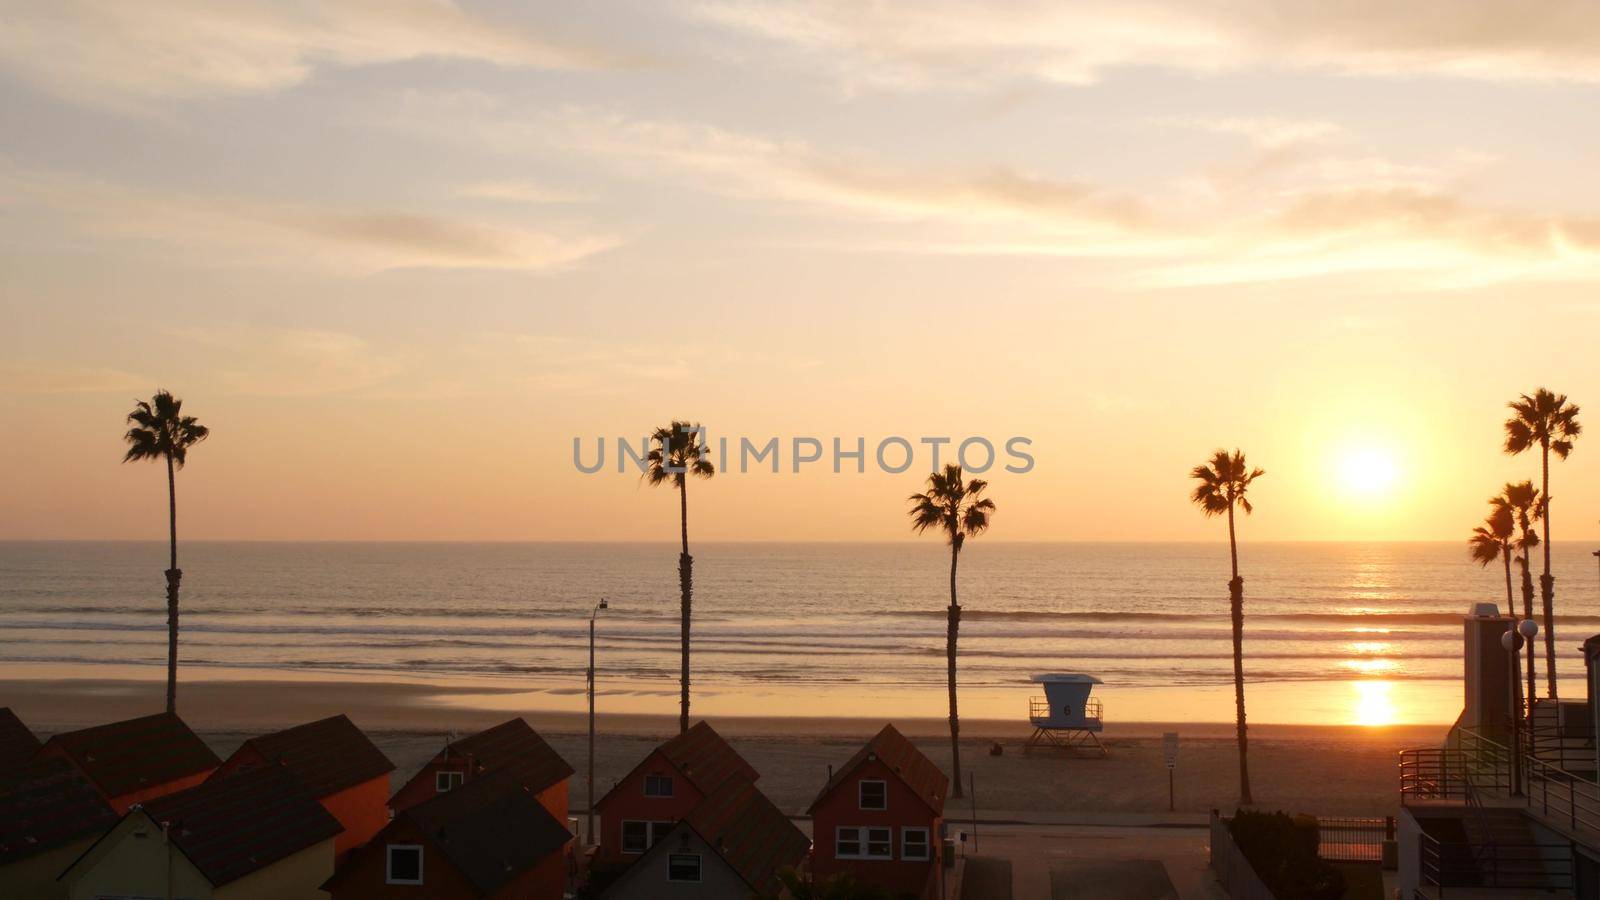 Palms and sunset sky, California aesthetic. Los Angeles vibes. Lifeguard watchtower, watch tower hut by DogoraSun